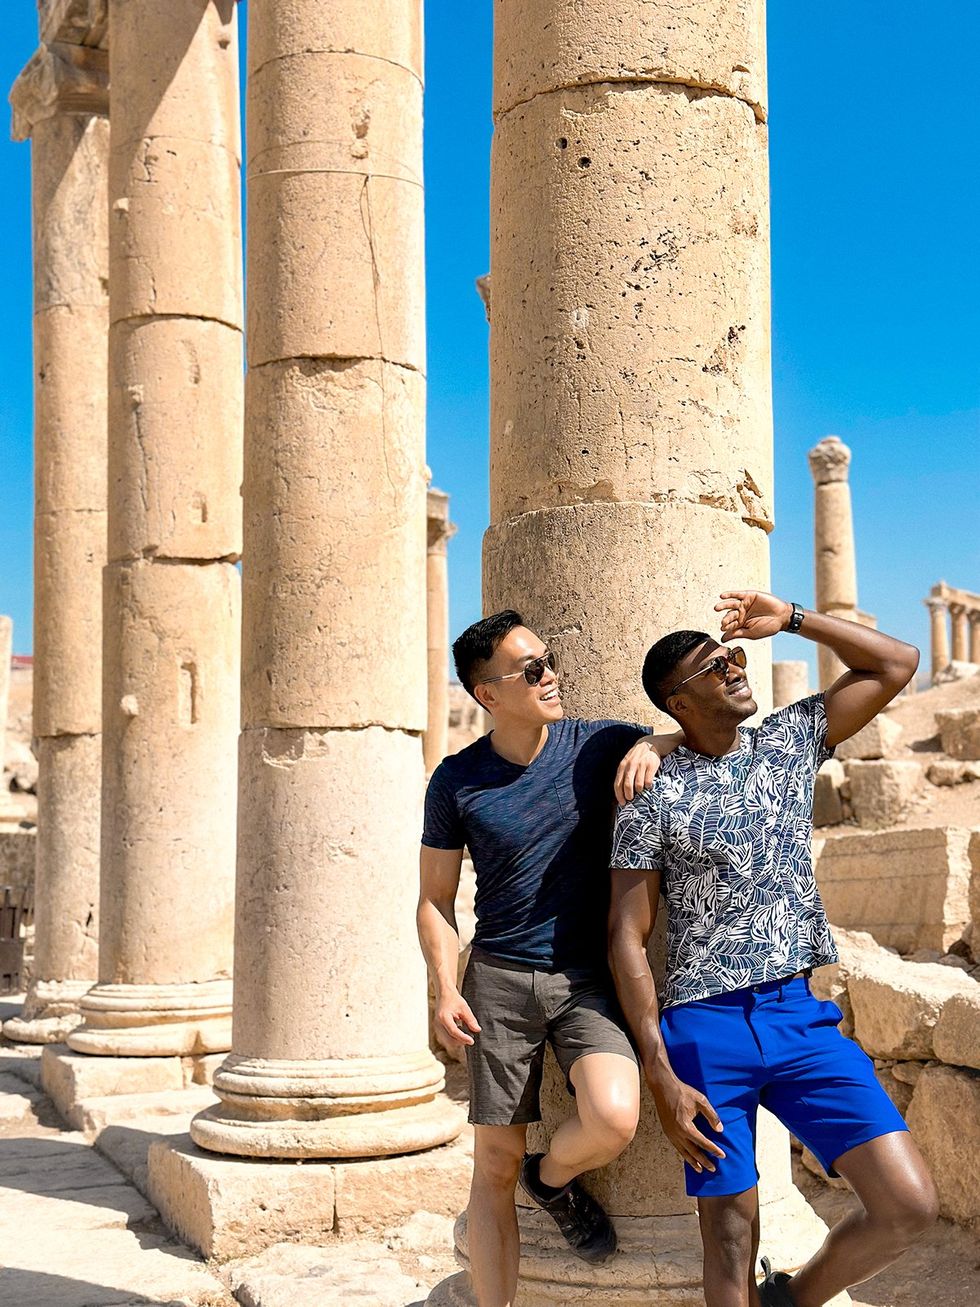 Barry Hoy's LGBTQ+ Syrian Adventure - \u200bBarry and Teraj at the Colonade Ruins of Jerash